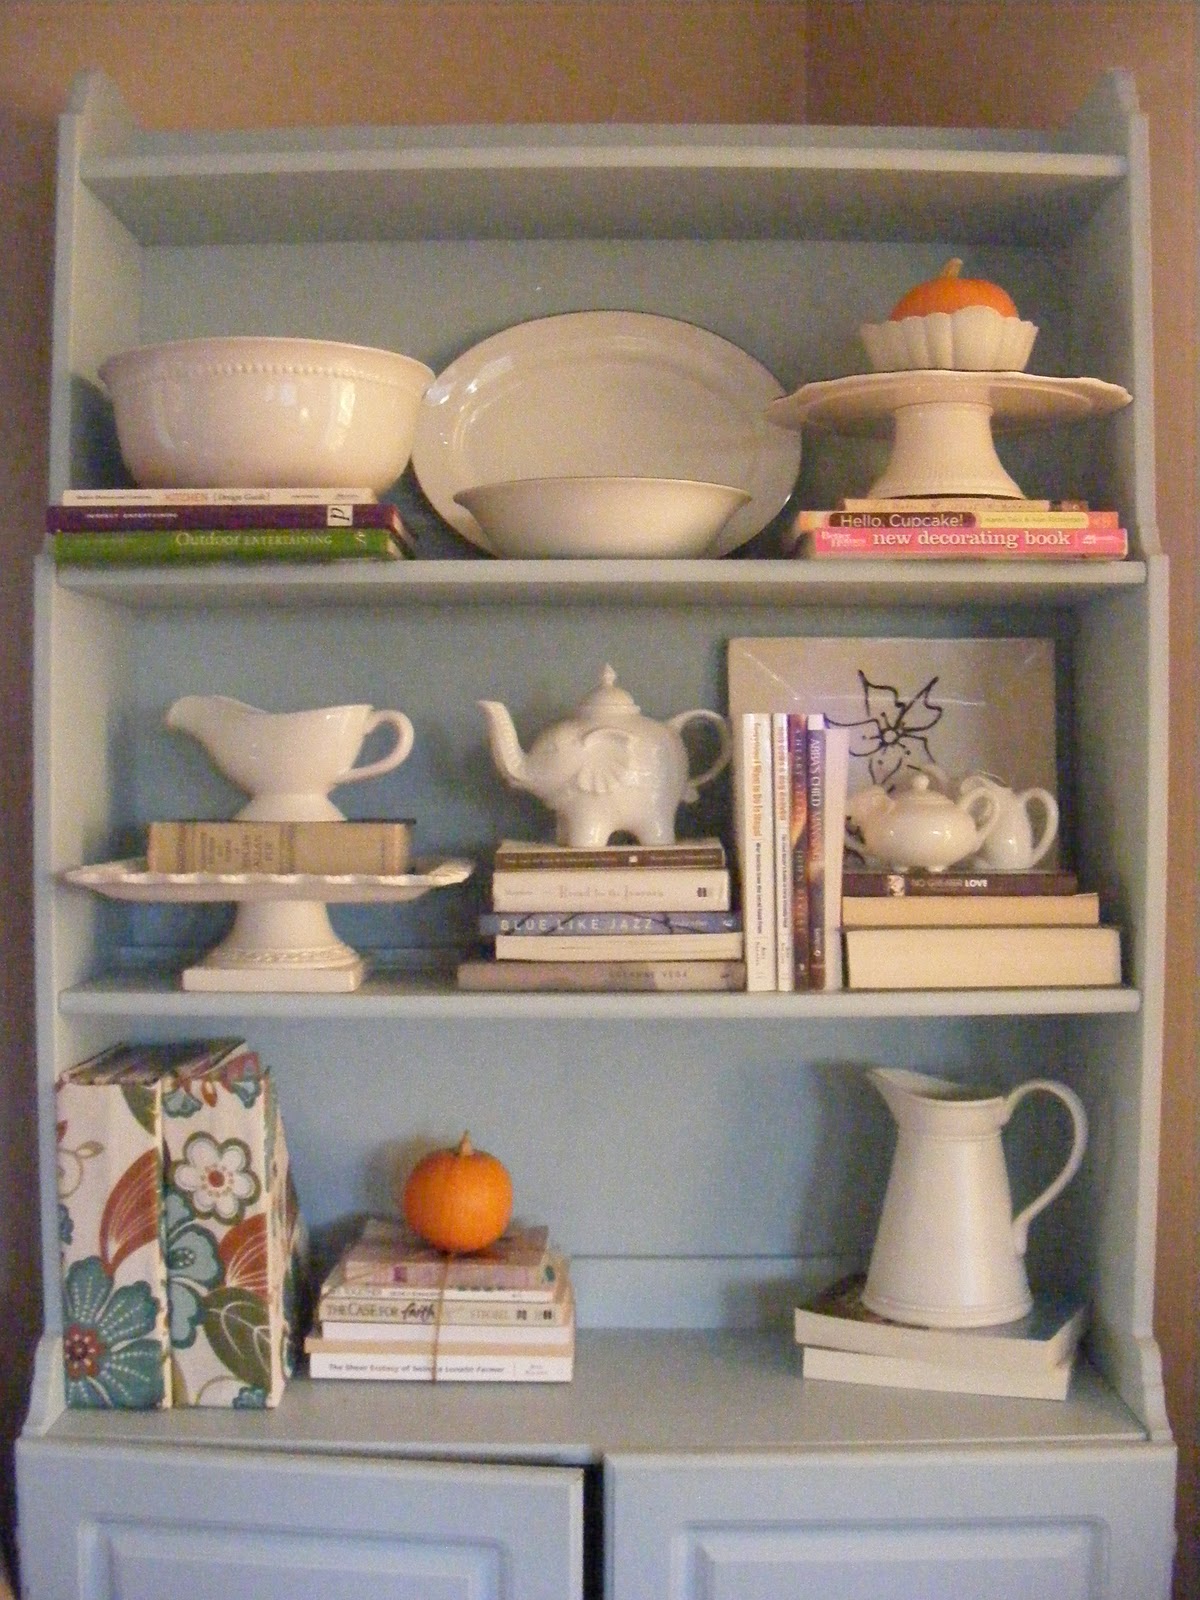 The Complete Guide to Imperfect Homemaking: September 2011